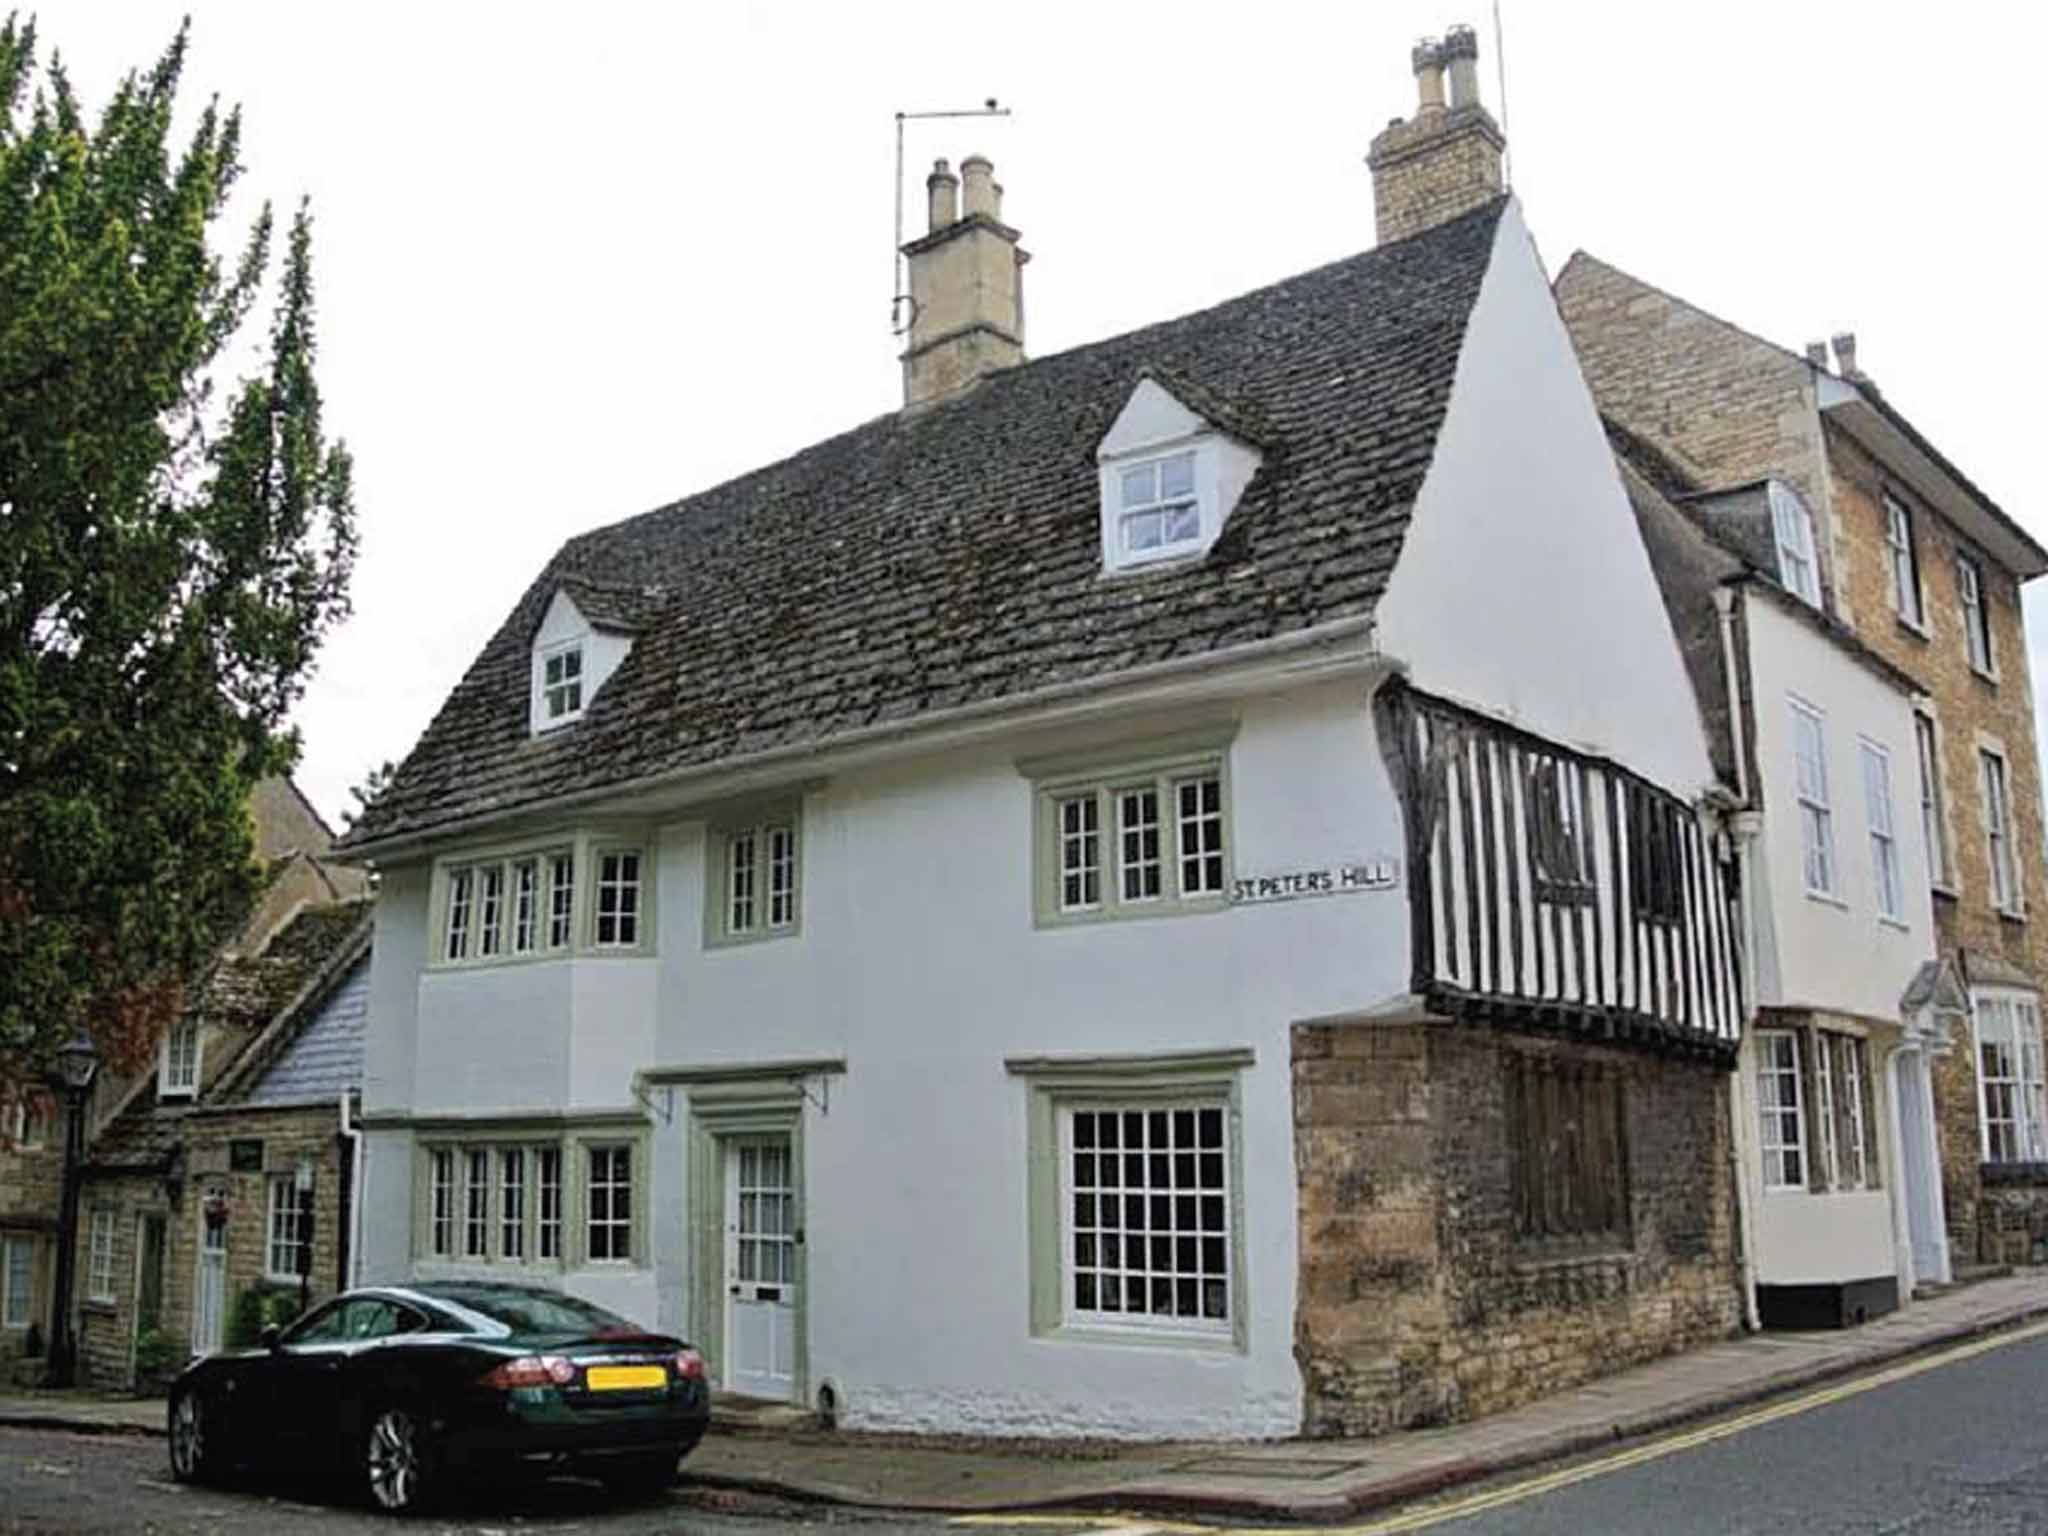 This Grade II three/four bedroom semi-detached house on St Peters Hill, Stamford, has rooms over four levels. It features stone mullion windows, exposed stonework, and a fireplace. On for £350,000 with Newton Fallowell